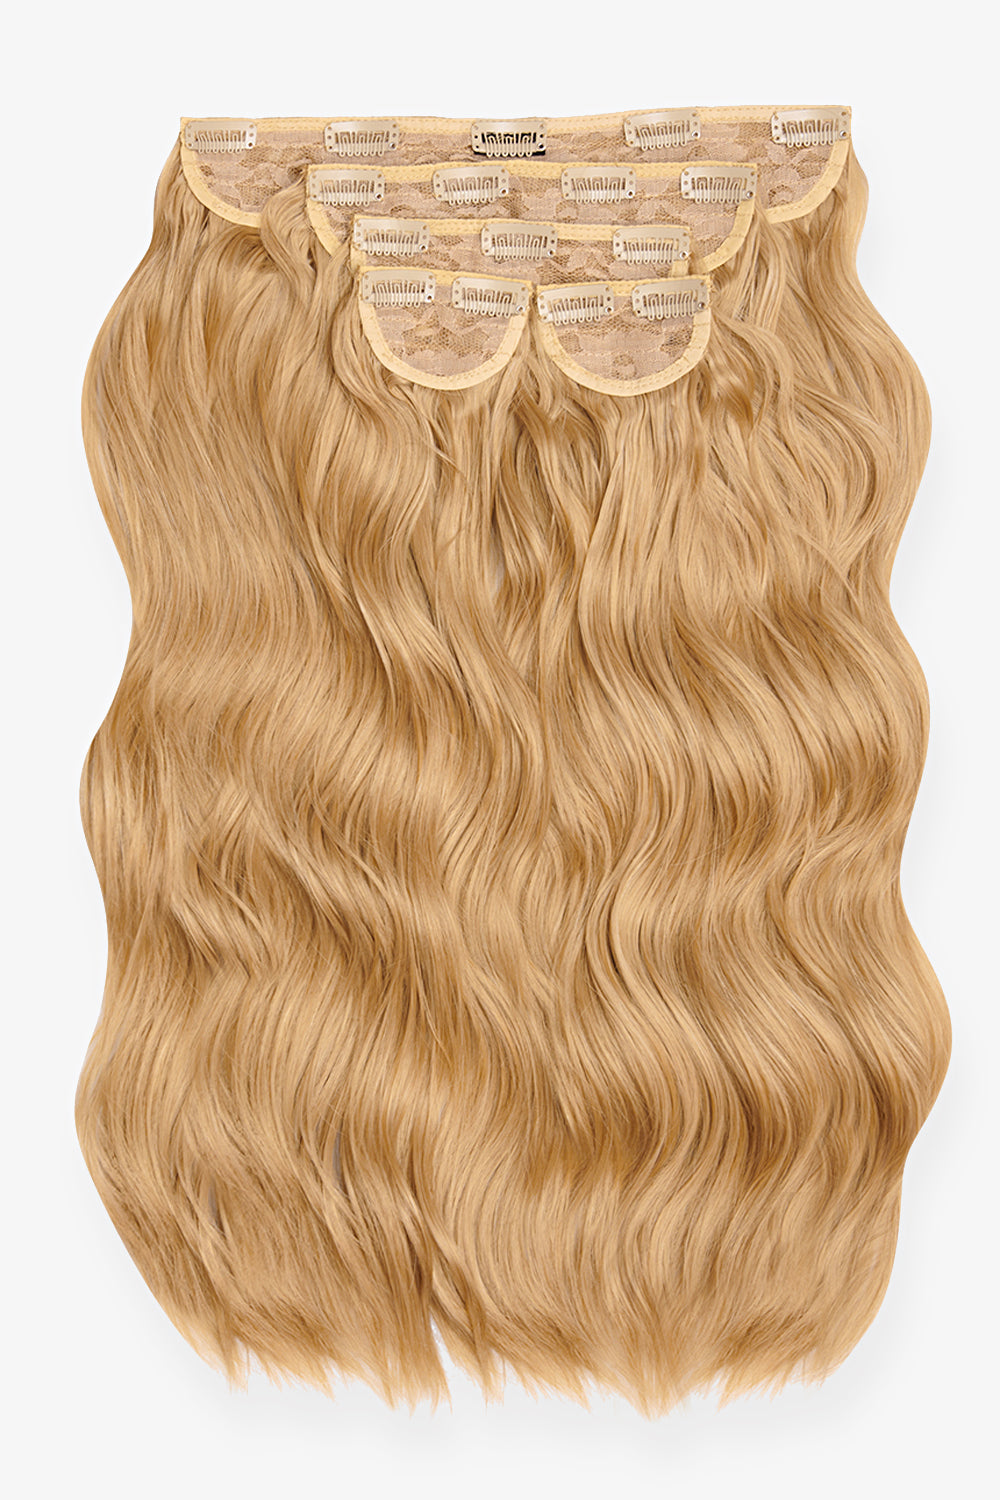 Super Thick 22’’ 5 Piece Brushed Out Wave Clip In Hair Extensions - Caramel Blonde